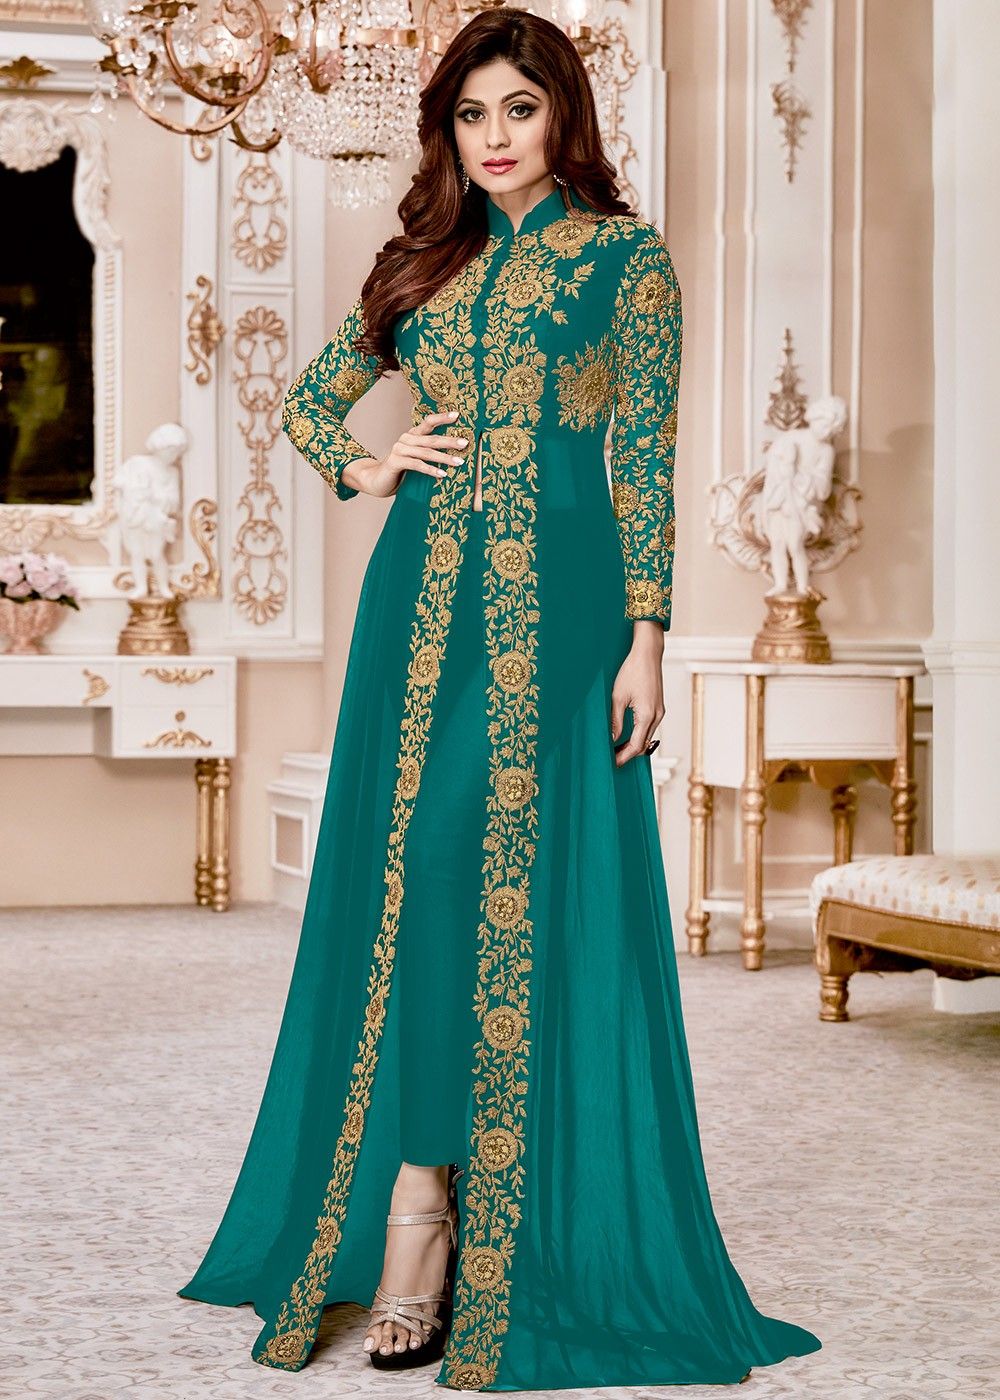 Shamita Shetty Sea Green Front Slit Pant Suit 1774sl15,Brown Color Combination For House Exterior